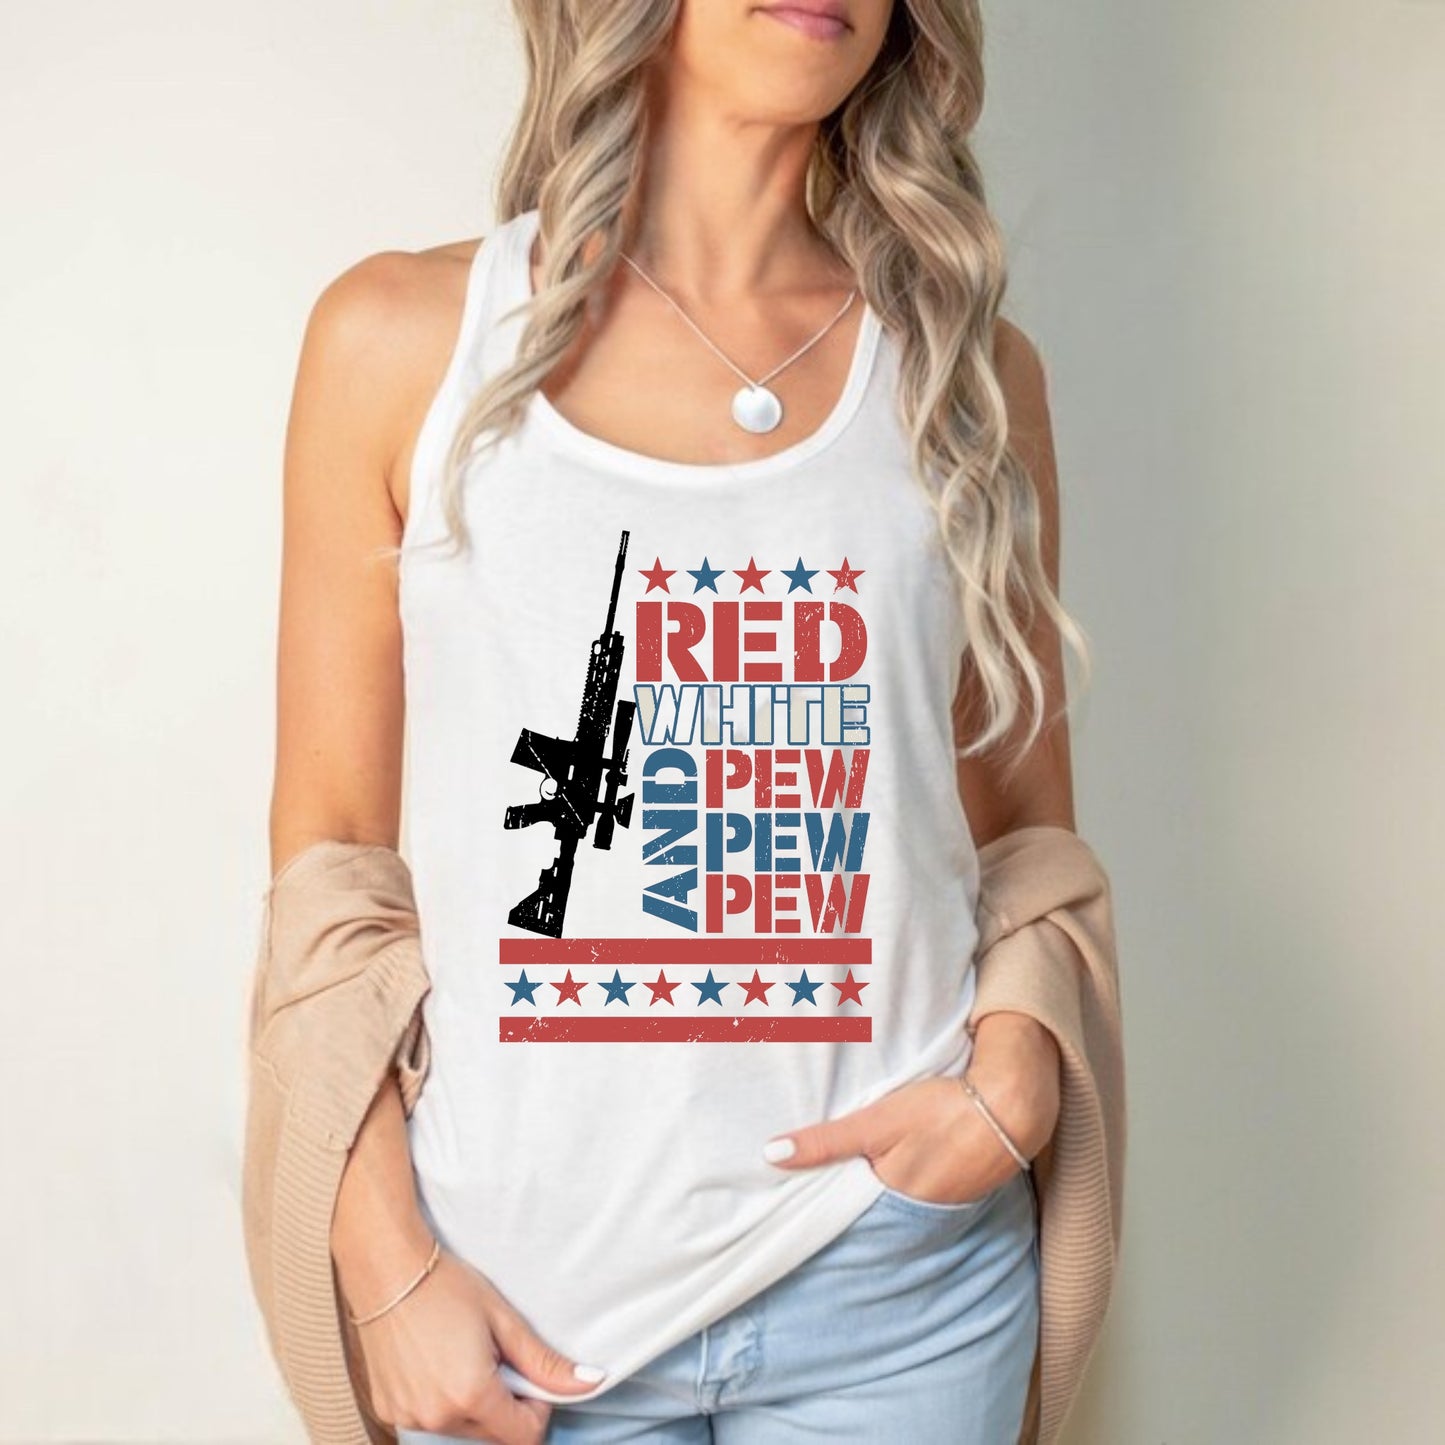 Red White and Pew Tank or Tee